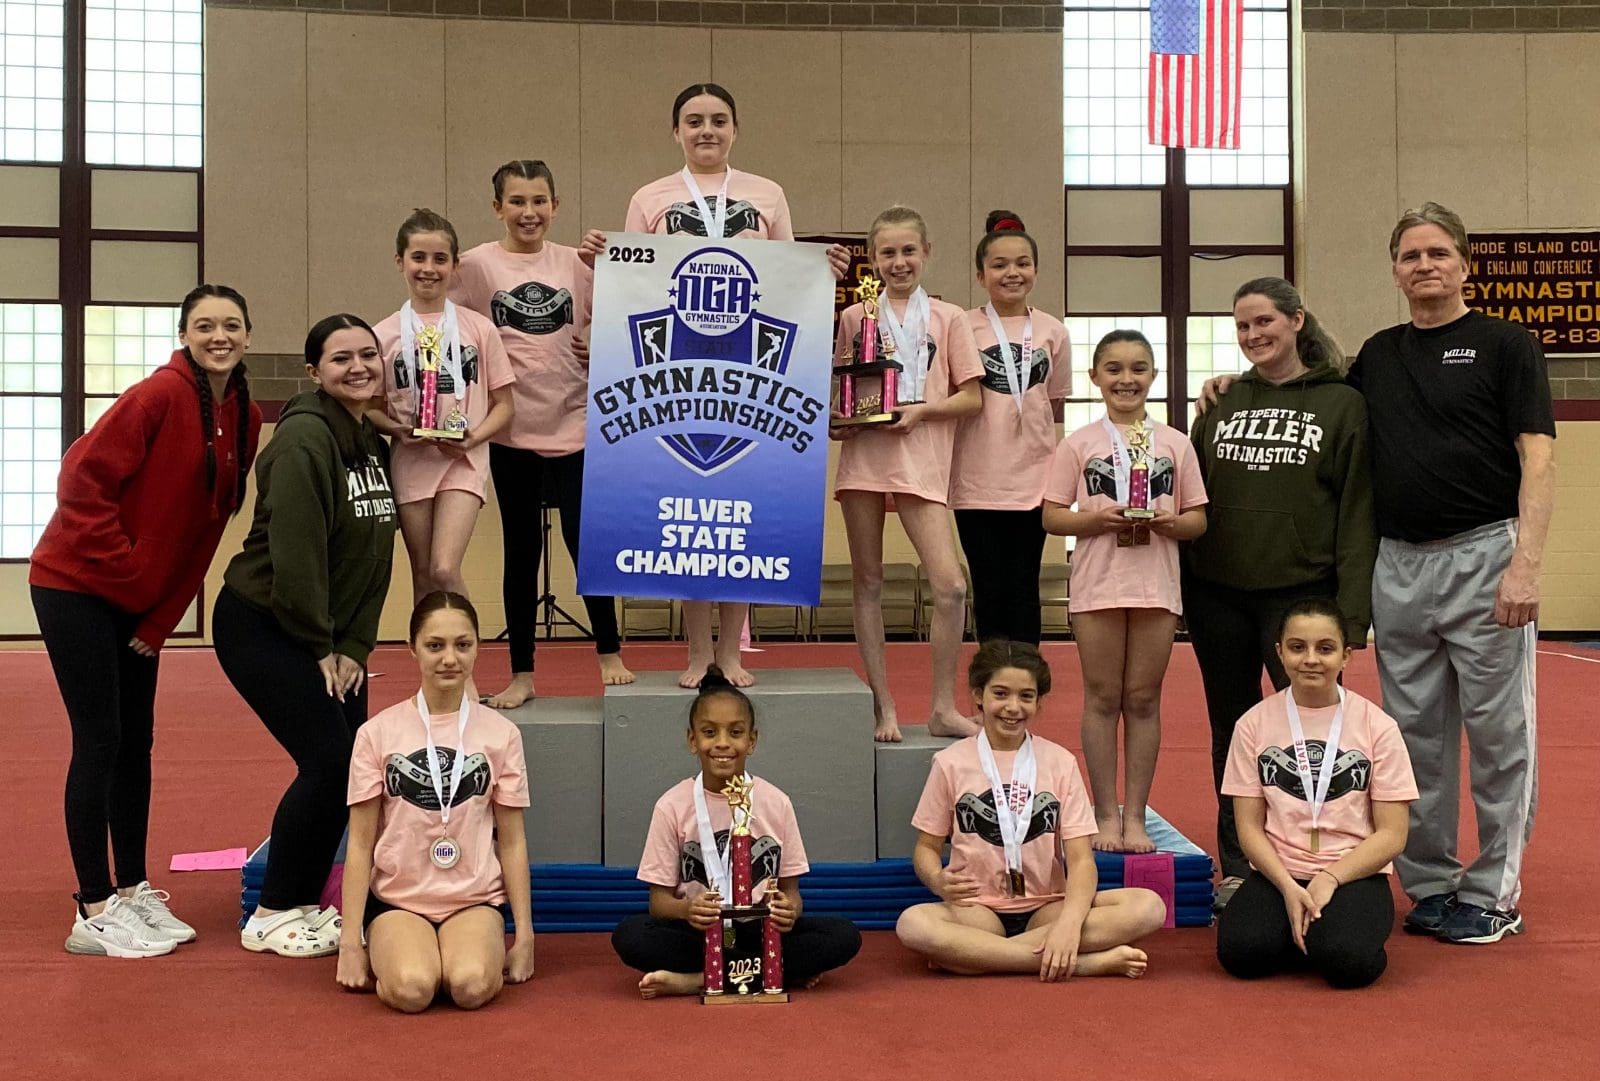 A group of gymnasts posing with their trophies.